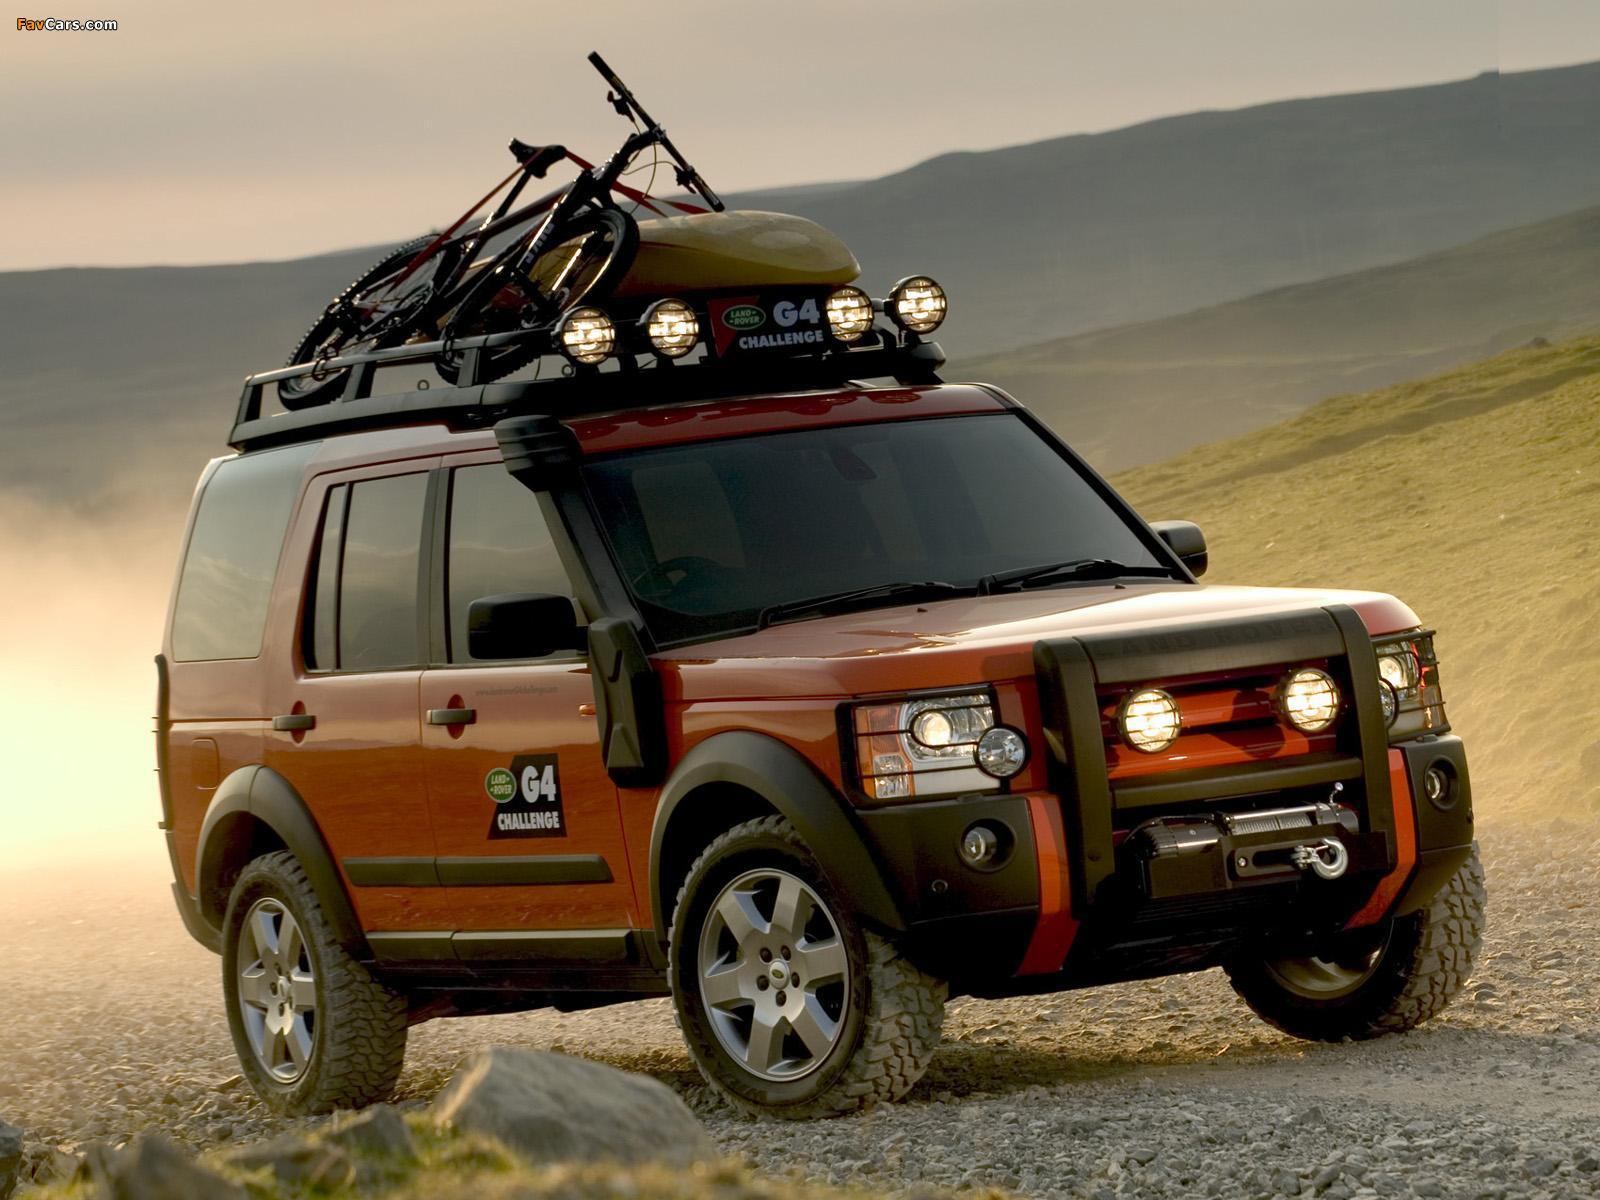 Land Rover Discovery 3 G4 Edition wallpaper